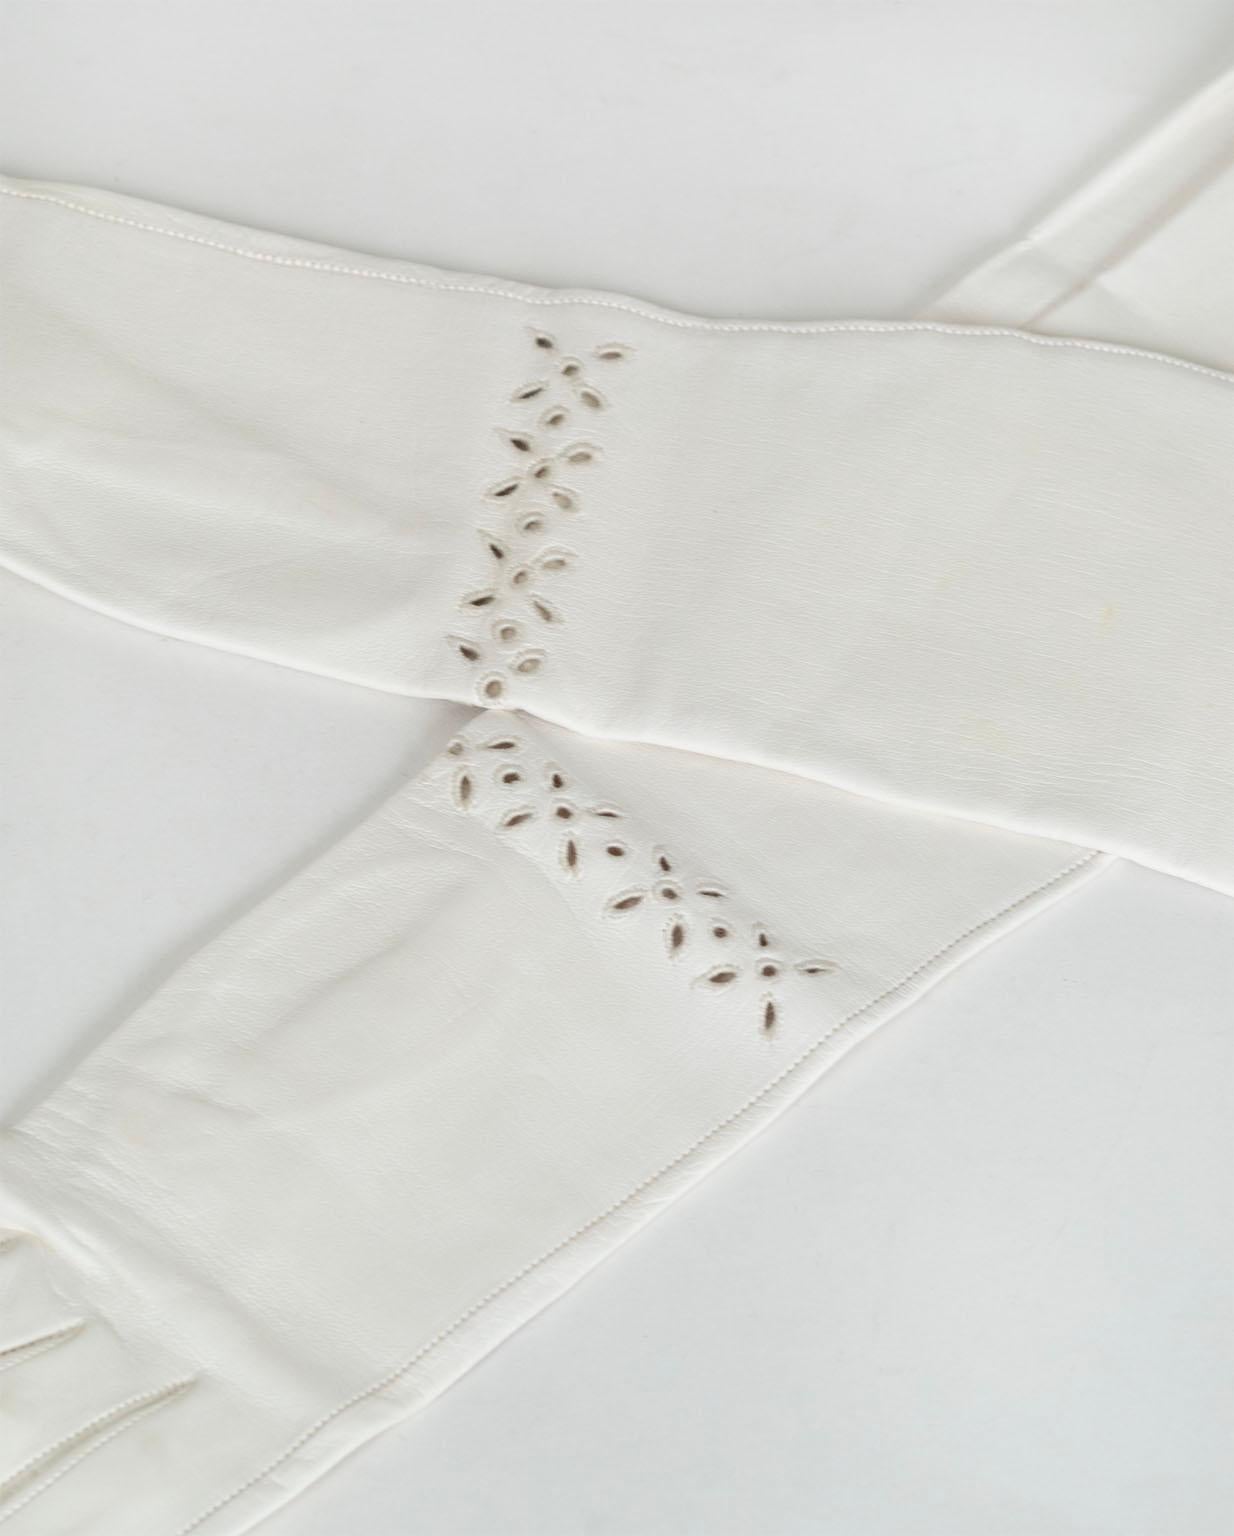 New Christian Dior White Kidskin Elbow Gloves w Eyelets, Orig Pkg – XS–S, 1950s In New Condition For Sale In Tucson, AZ